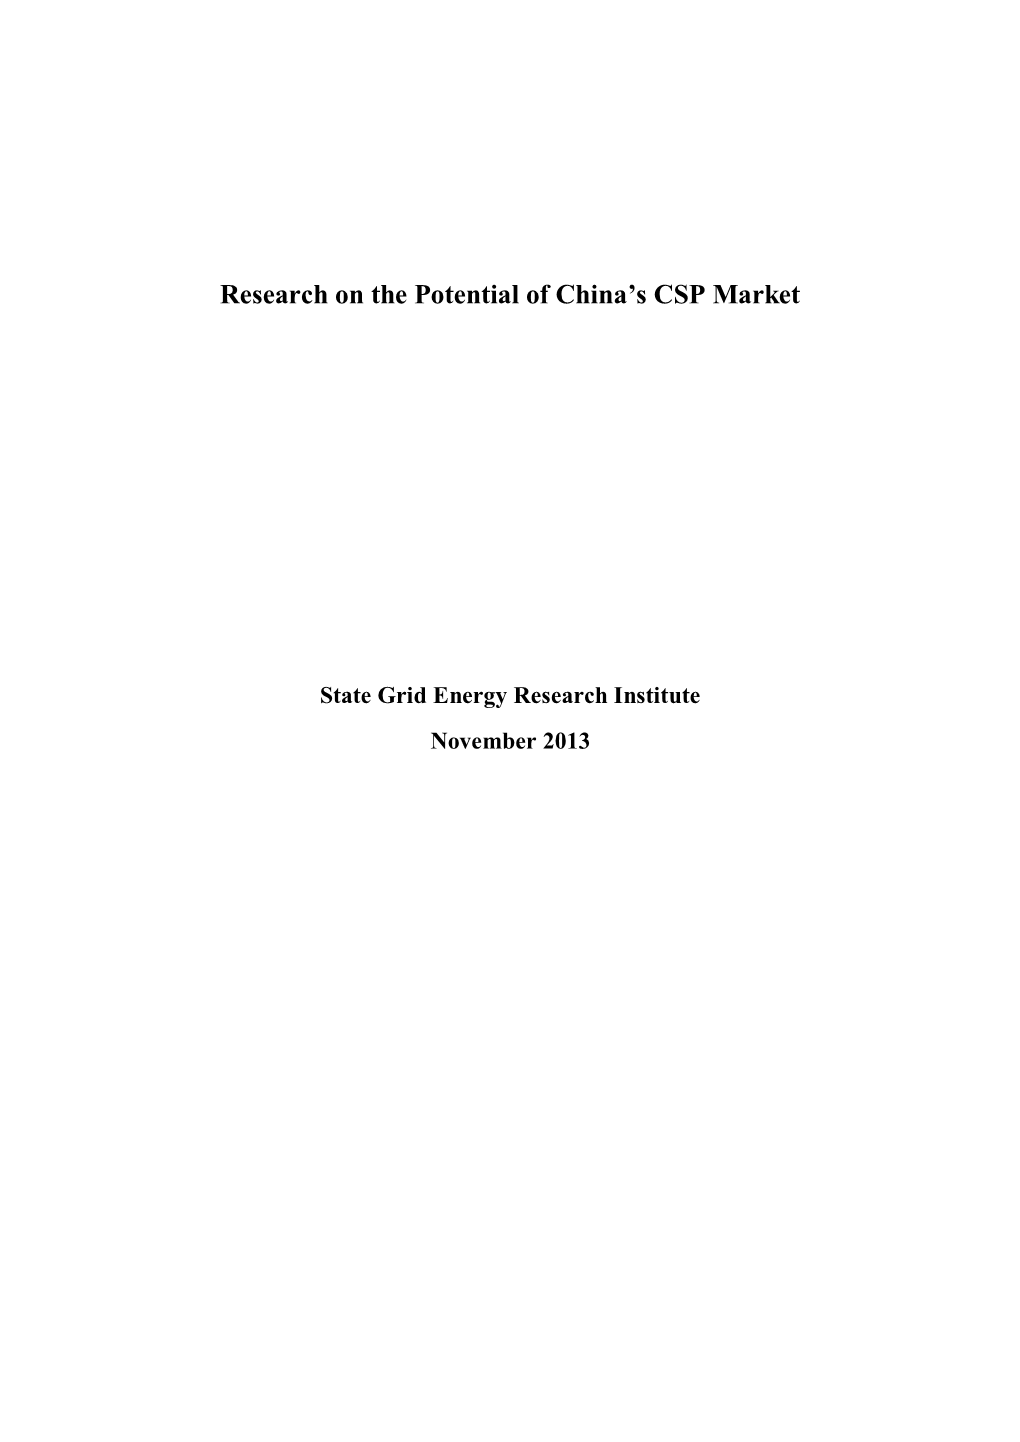 Research on the Potential of China's CSP Market